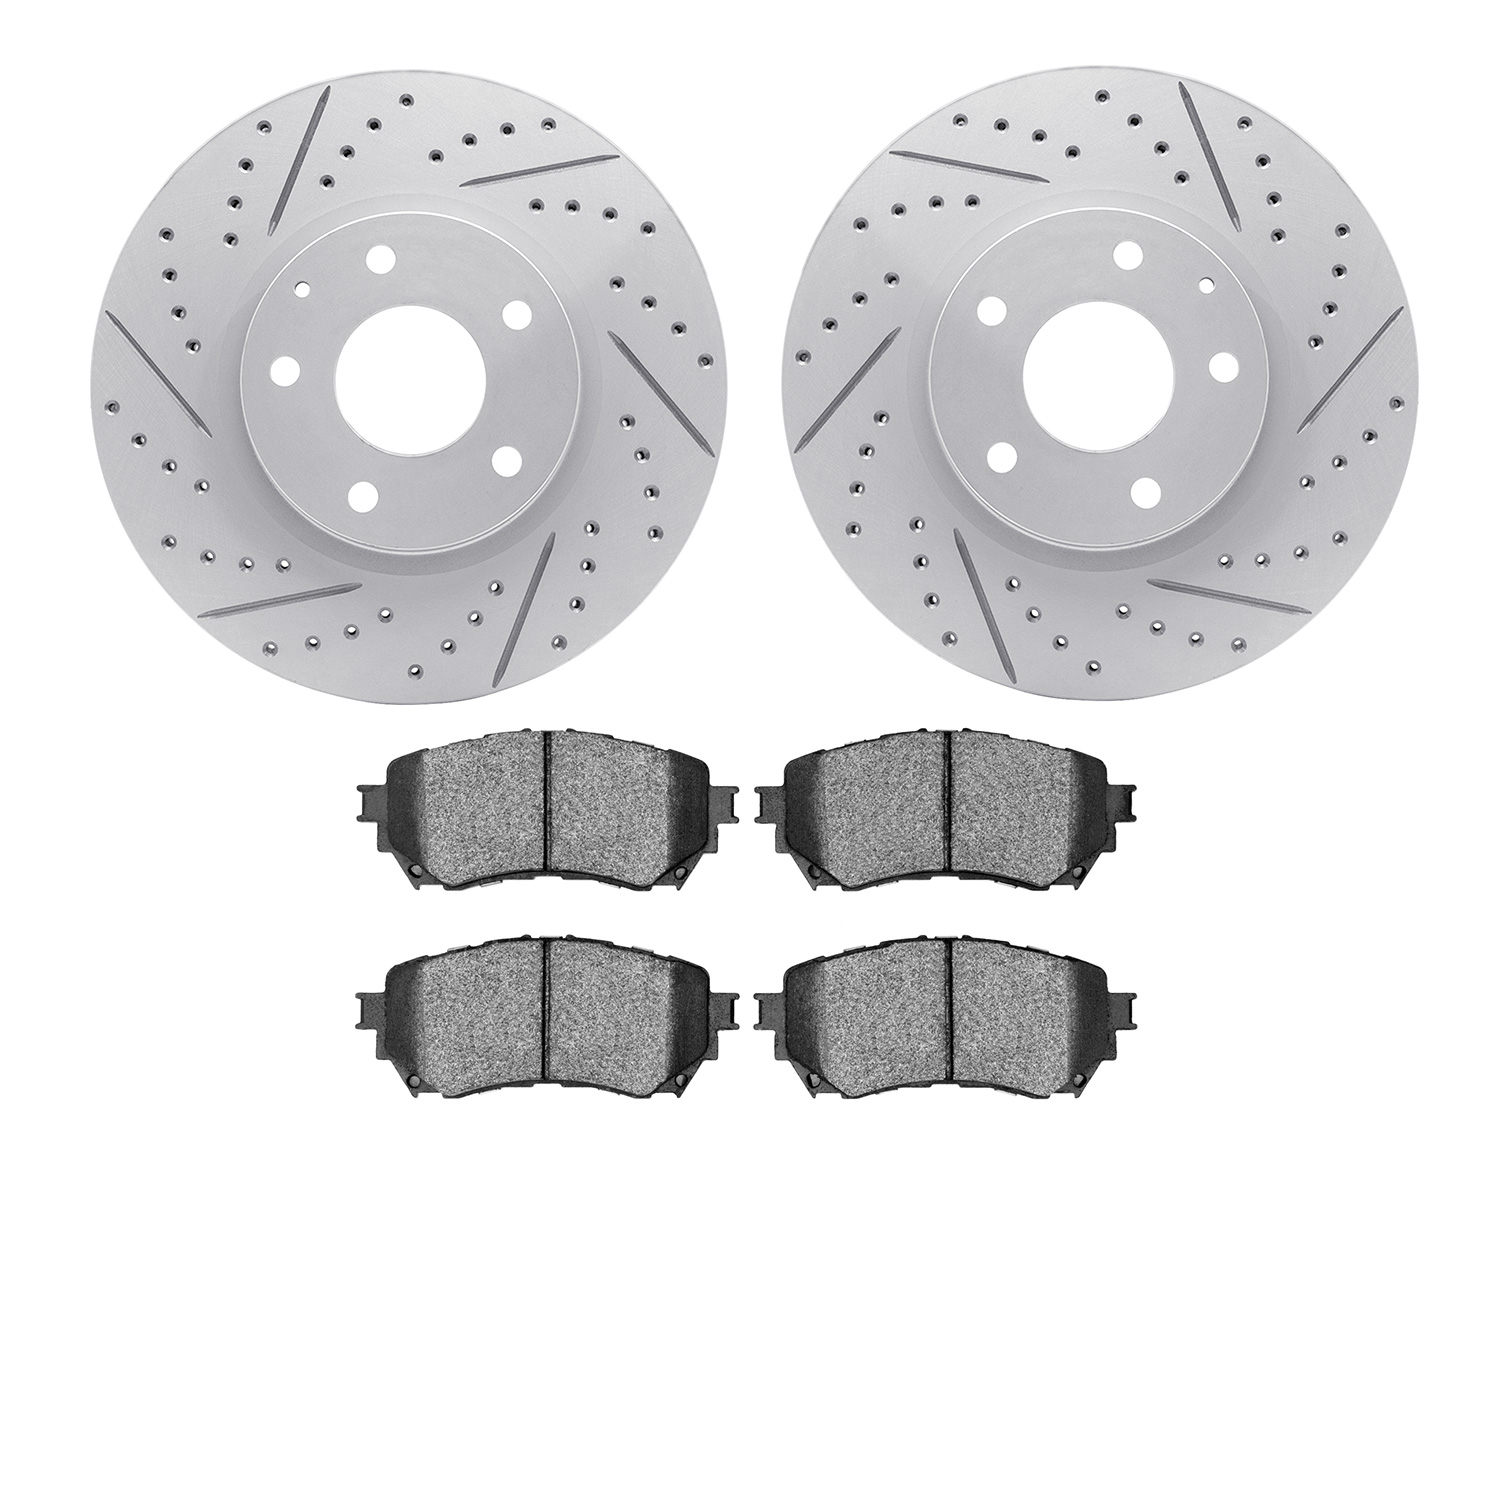 2502-80053 Geoperformance Drilled/Slotted Rotors w/5000 Advanced Brake Pads Kit, 2016-2019 Ford/Lincoln/Mercury/Mazda, Position: